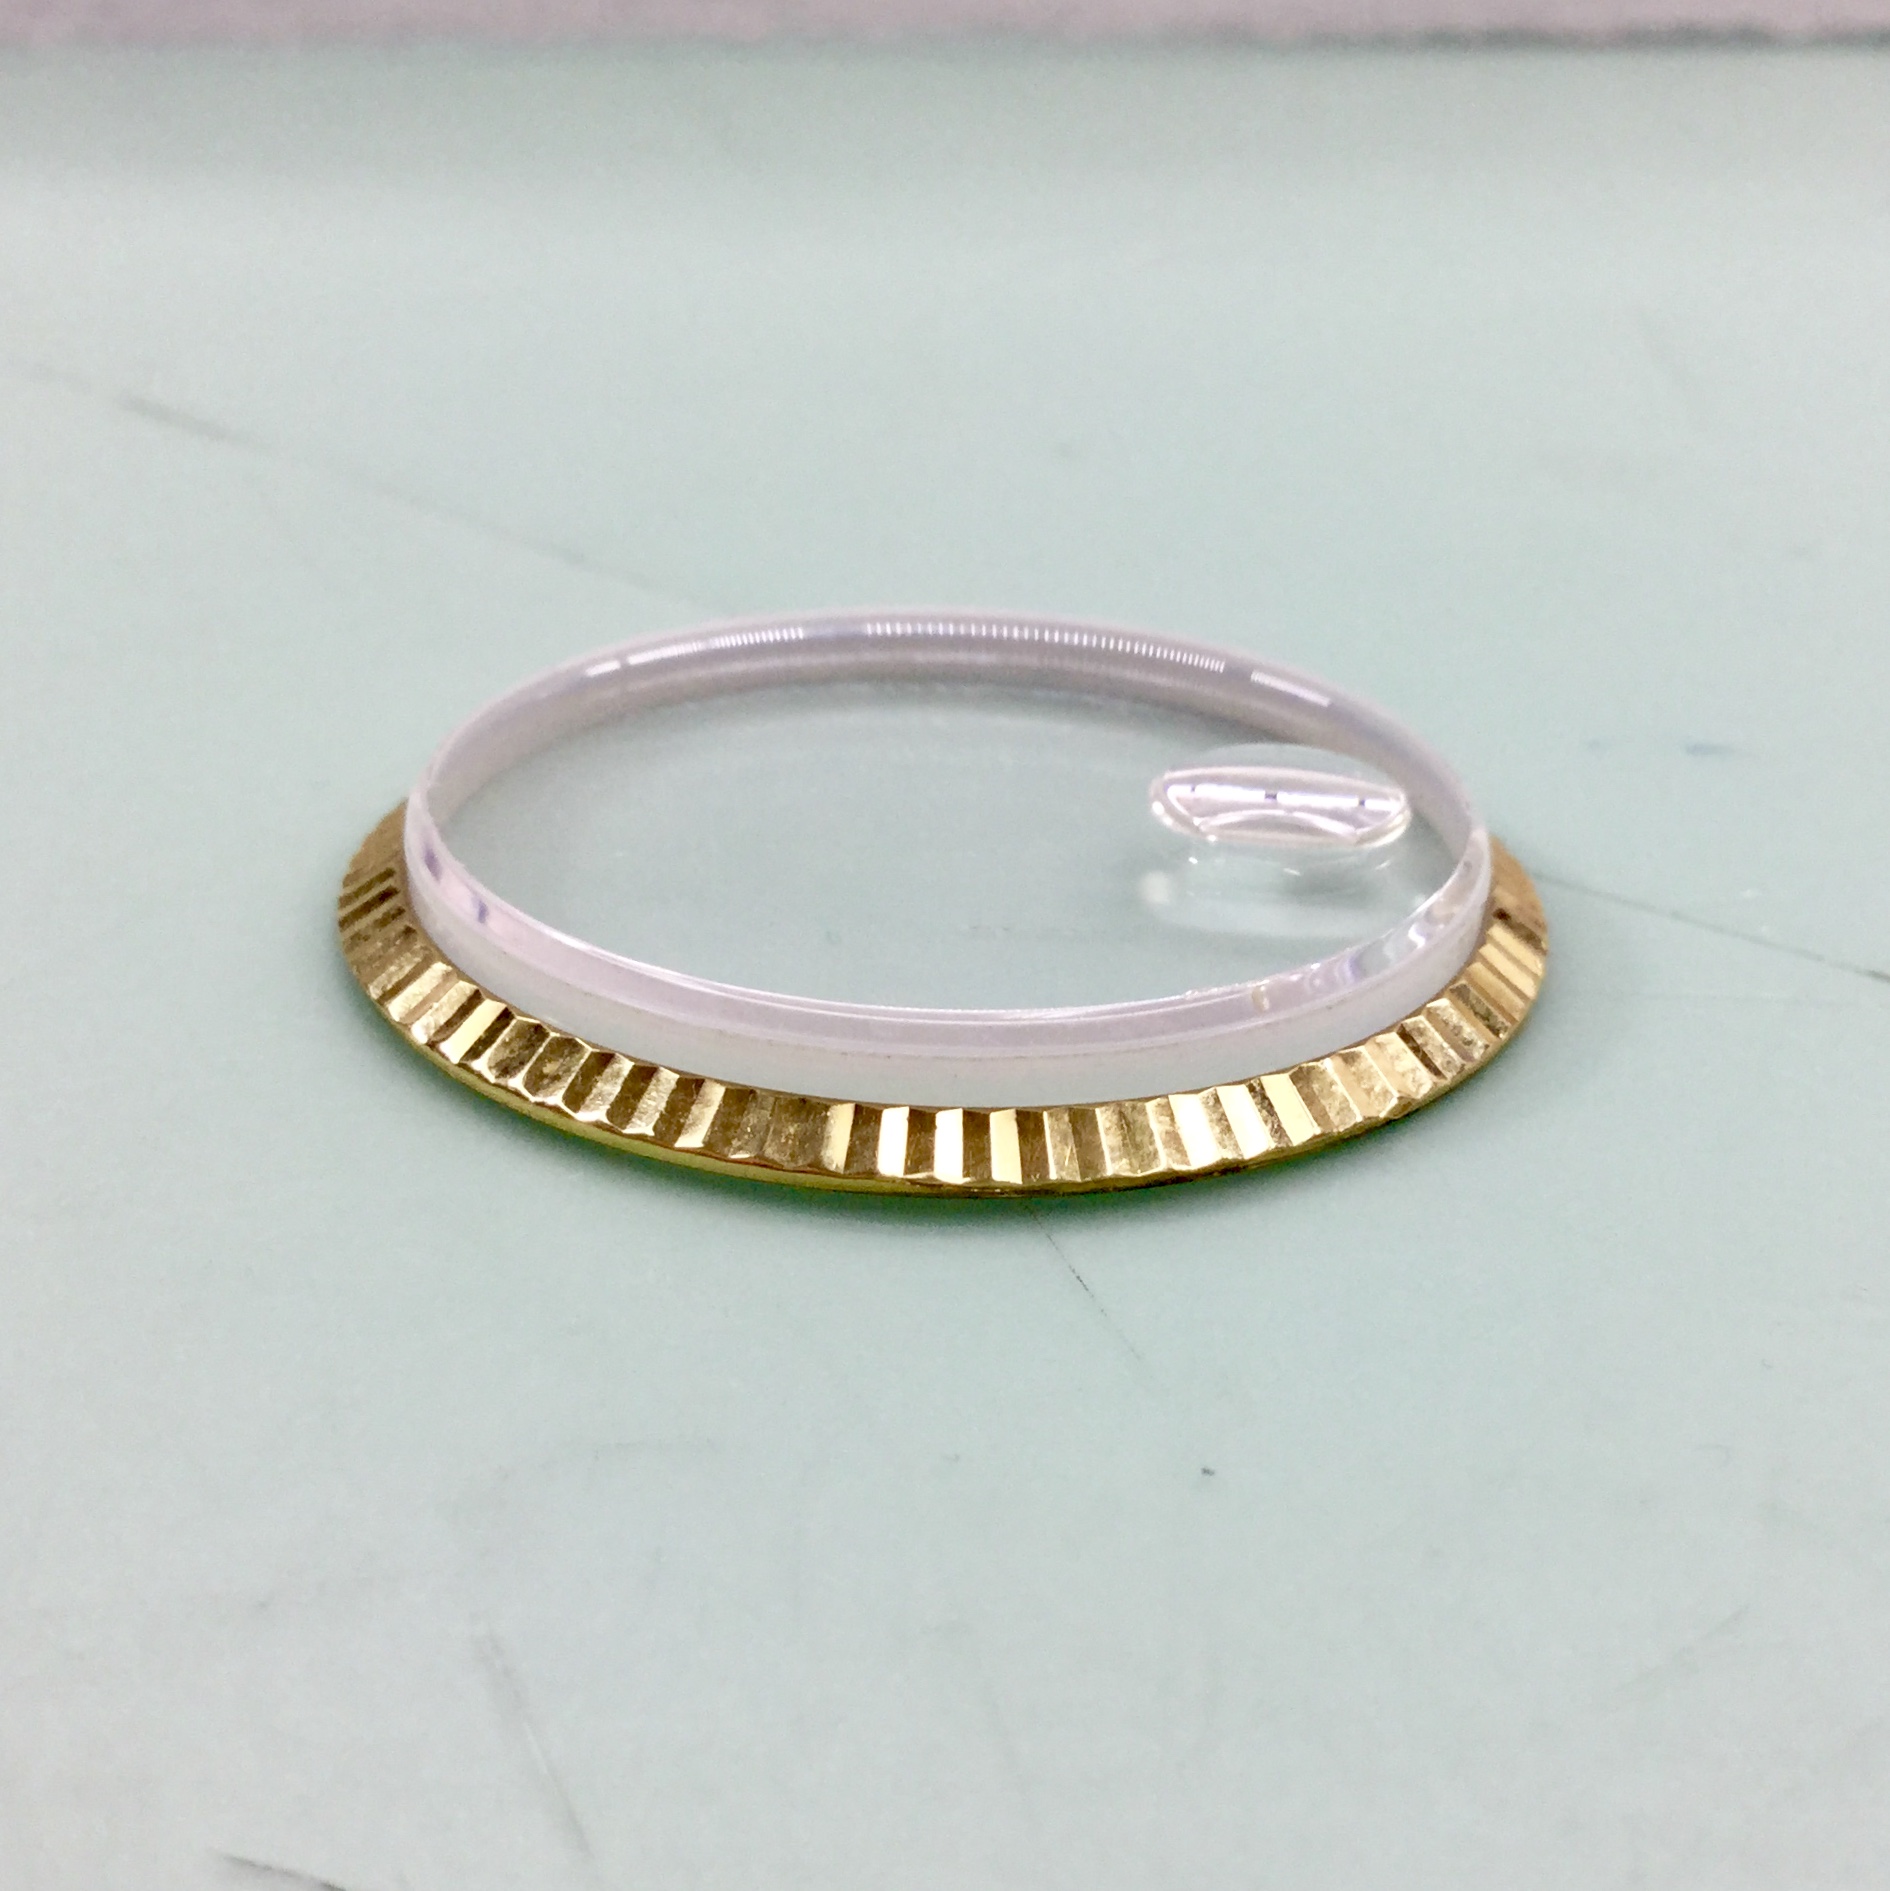 rolex watch glass replacement